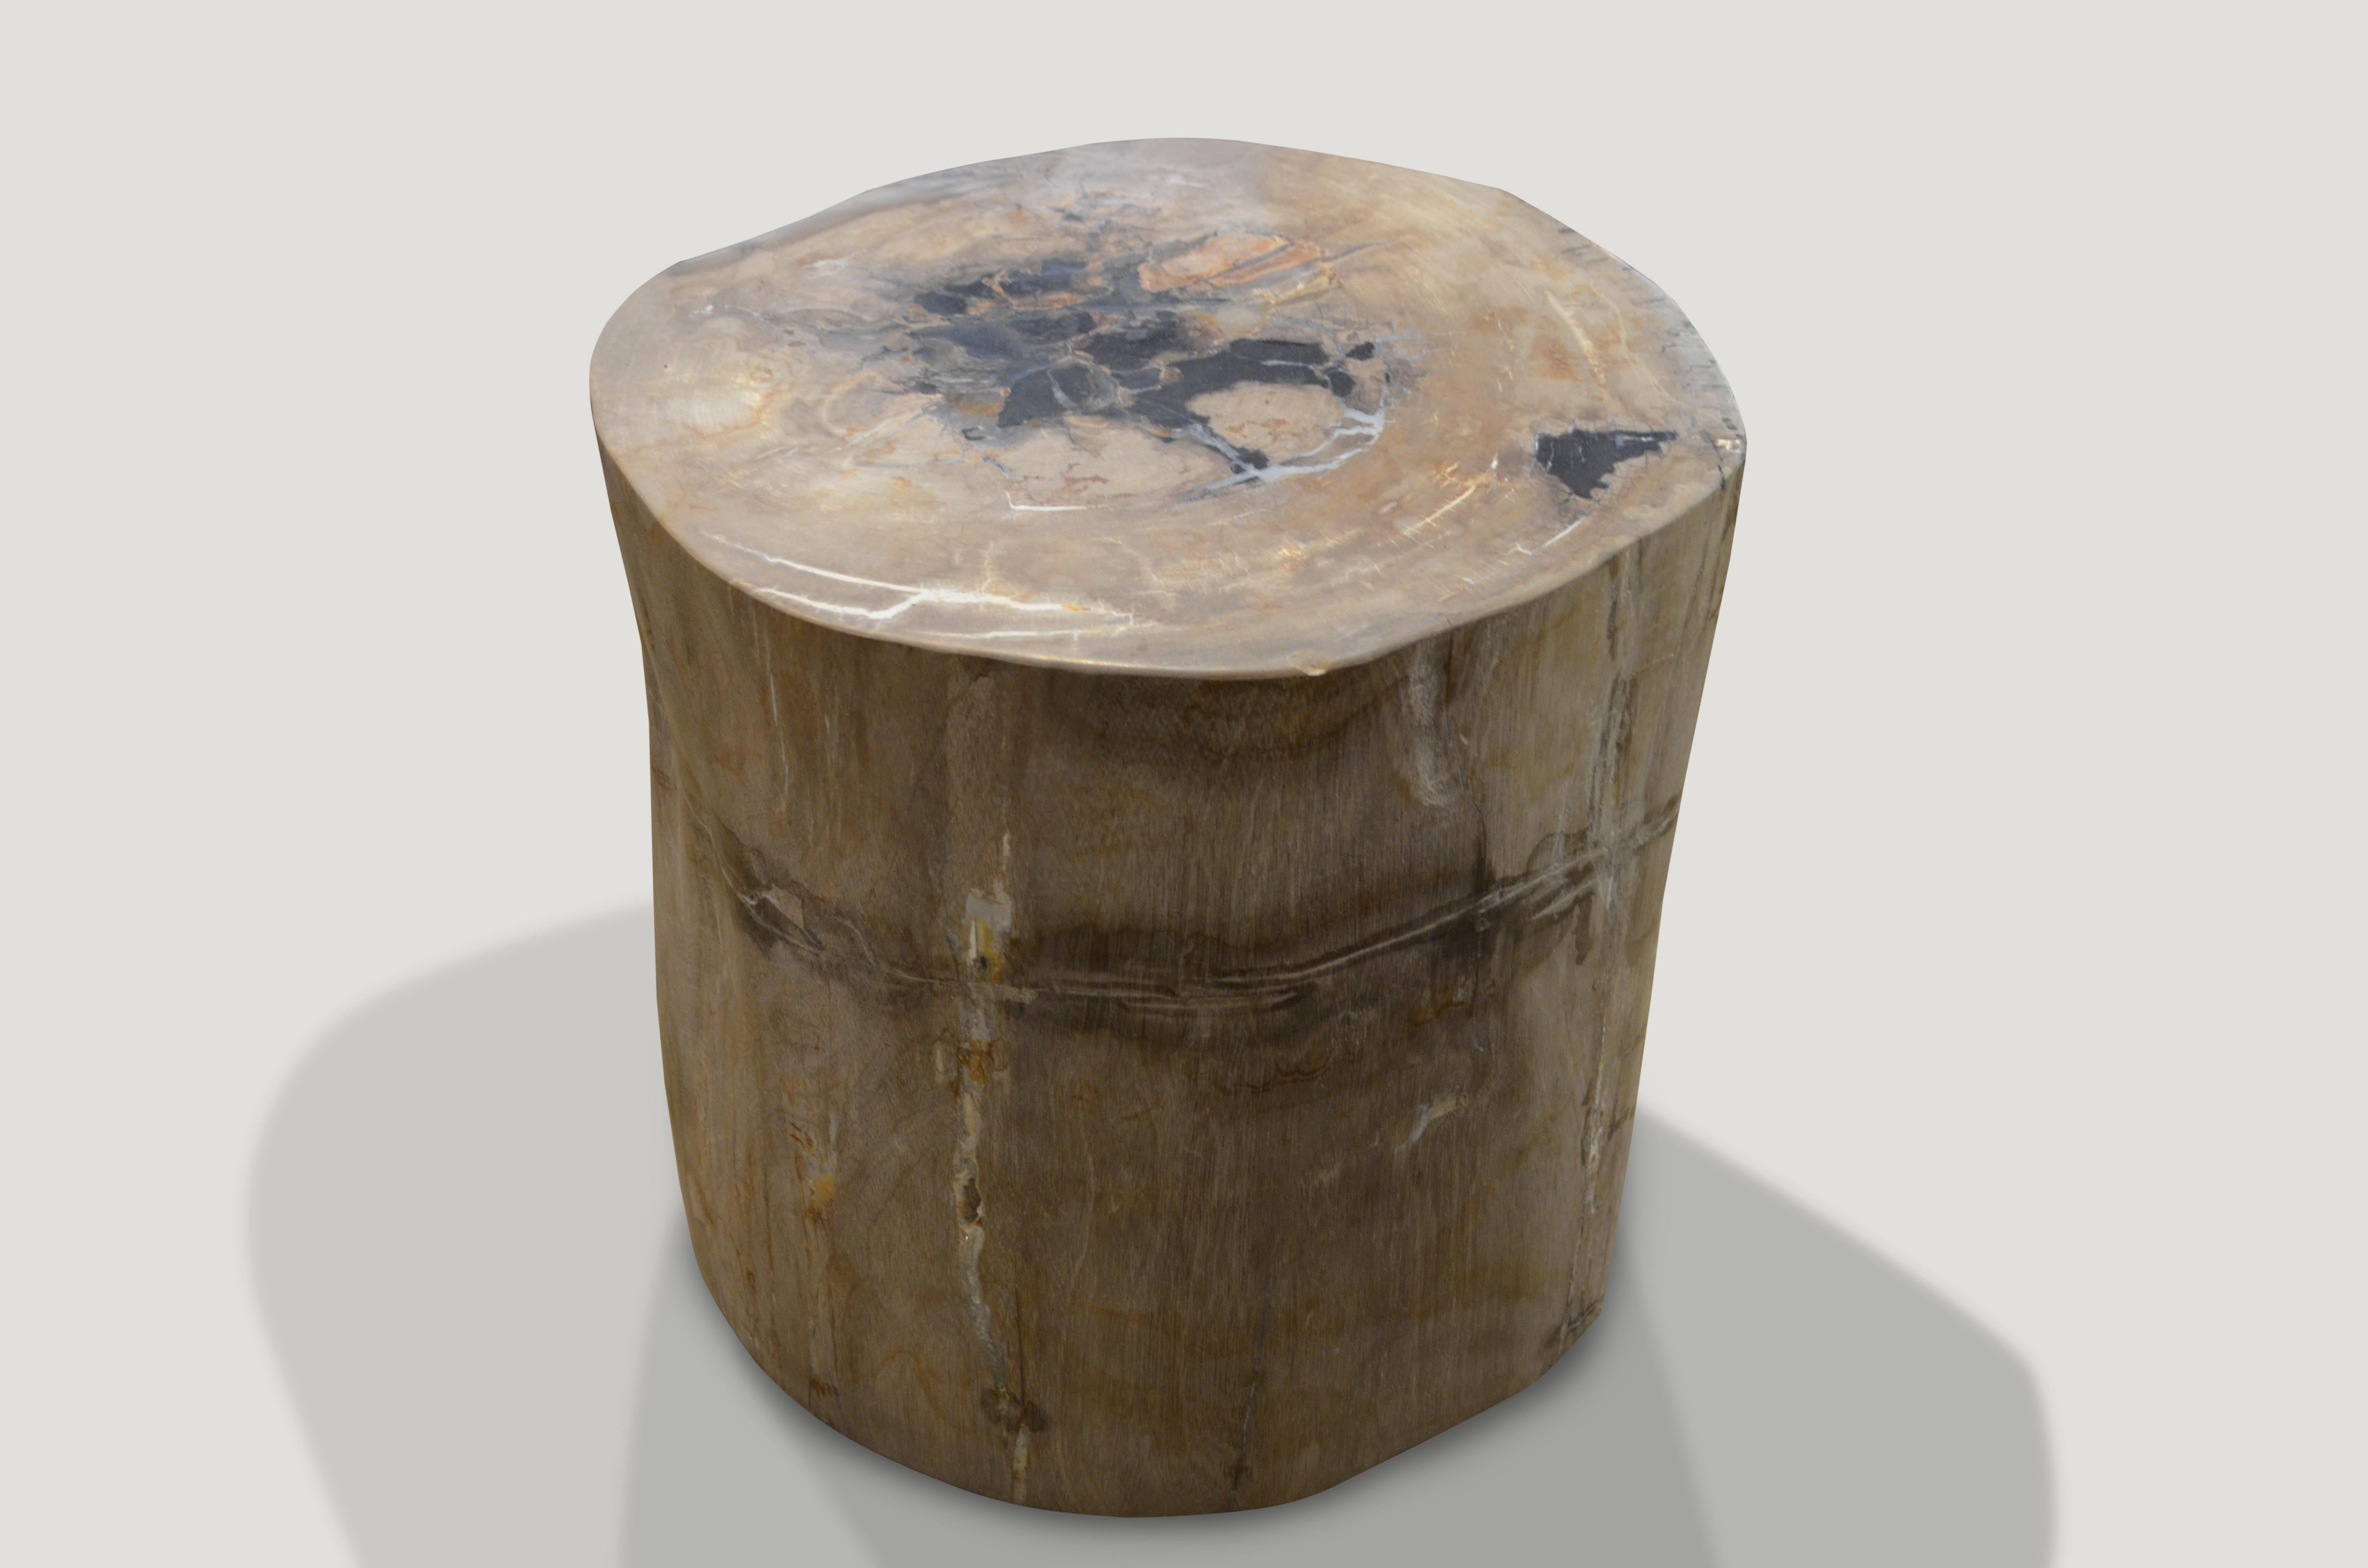 Impressive petrified wood side table with stunning neutral tones.

We source the highest quality petrified wood available. Each piece is hand selected and highly polished with minimal cracks. Petrified wood is extremely versatile – even great